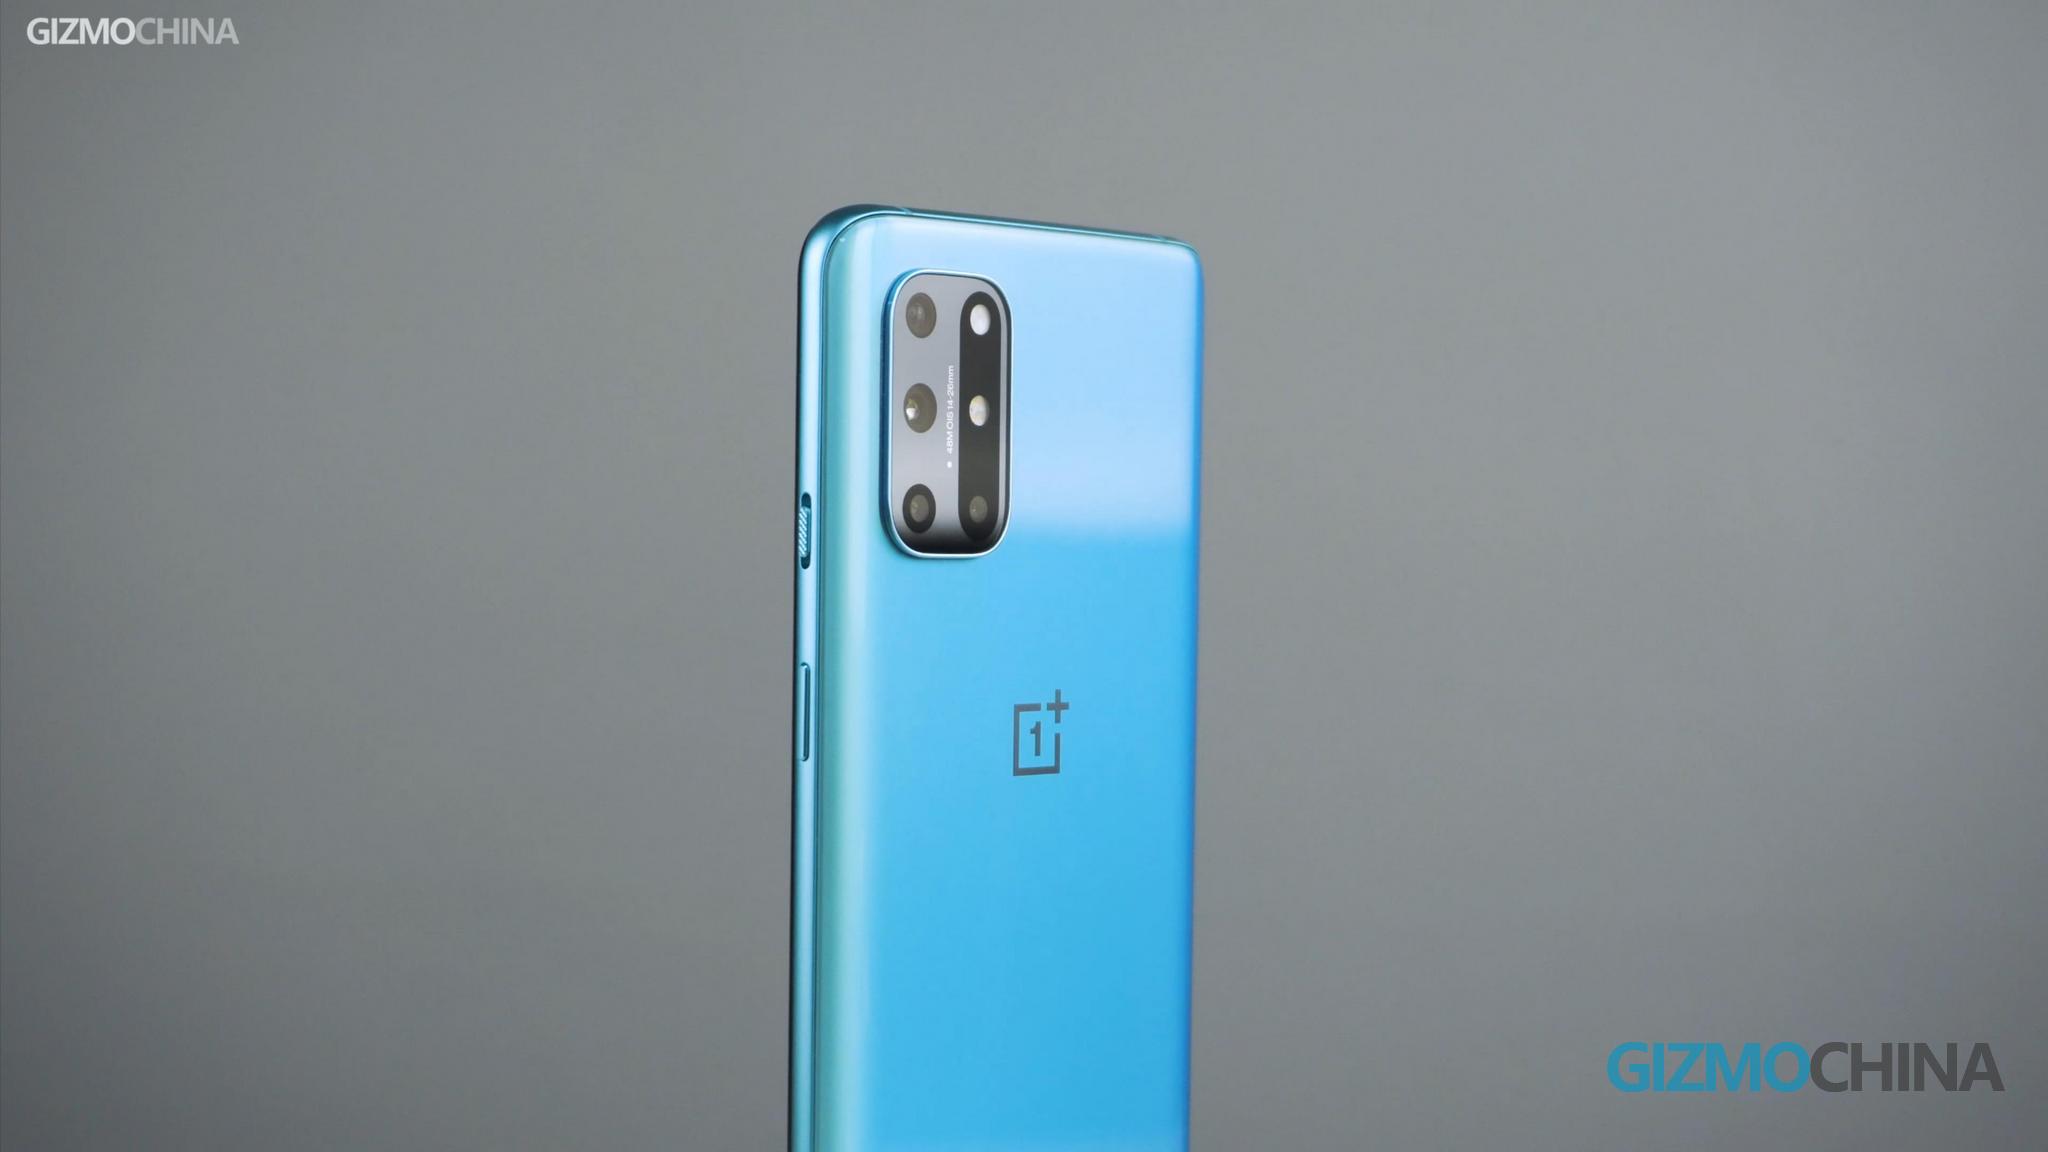 OnePlus to continue selling the OnePlus 8 series for the first half of 2021